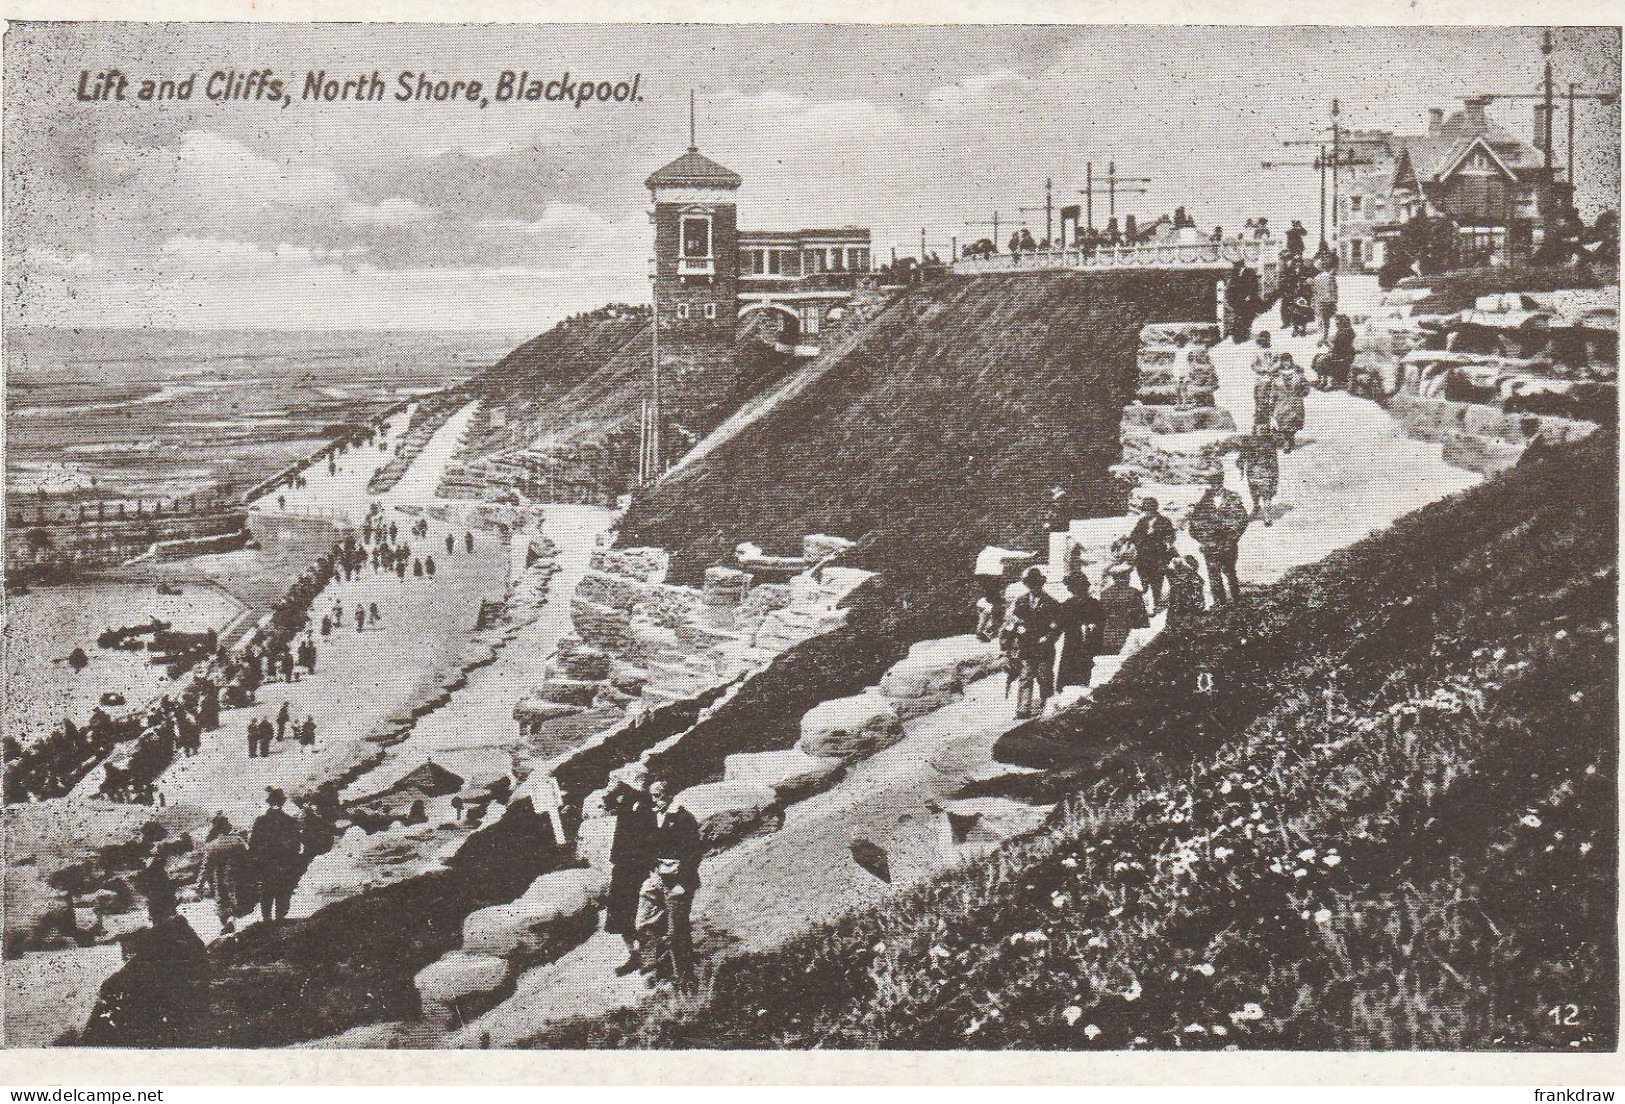 Postcard - Lift And Cliffs, North Shore, Blackpool - No Card No. - Very Good - Unclassified